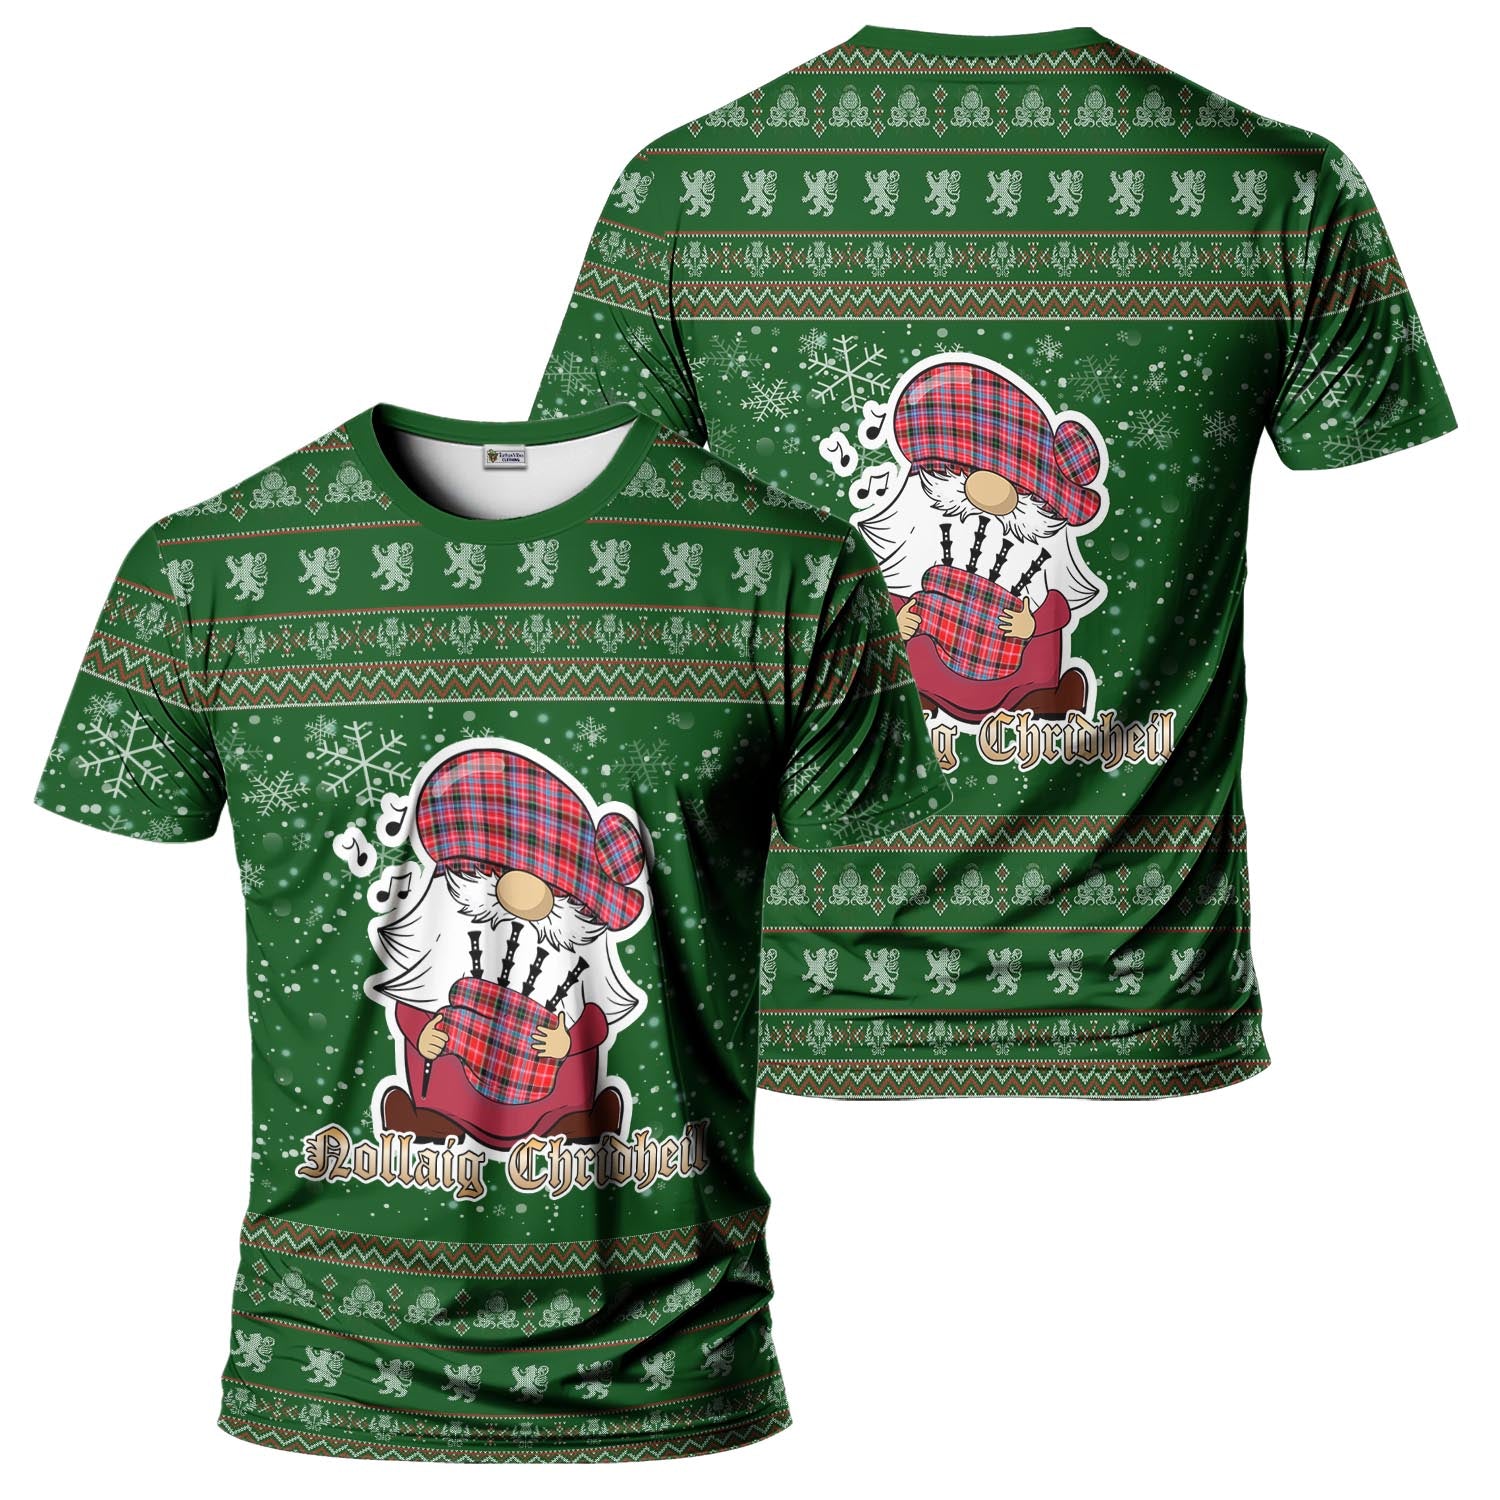 Aberdeen District Clan Christmas Family T-Shirt with Funny Gnome Playing Bagpipes Men's Shirt Green - Tartanvibesclothing